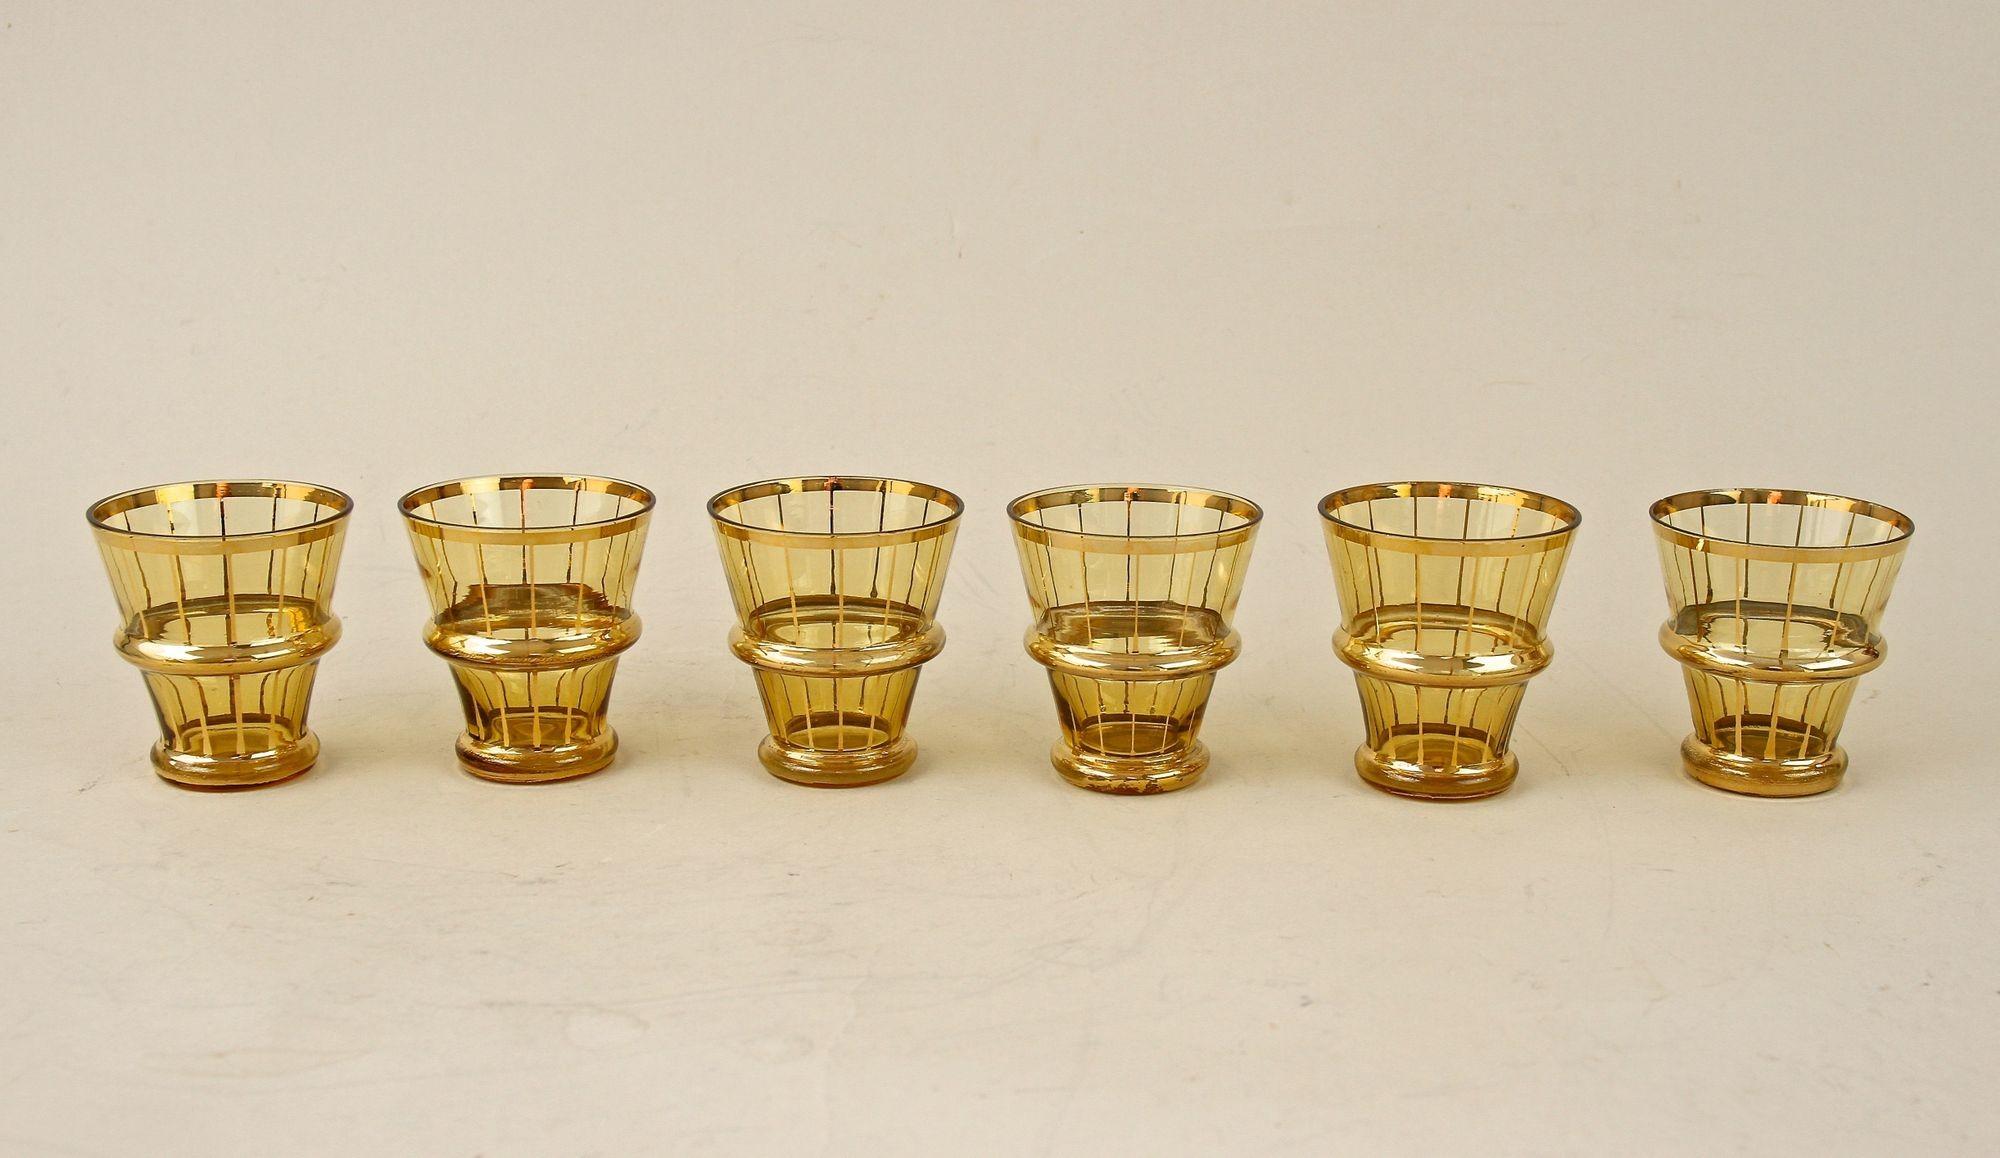 Amber Colored Gilt Art Deco Glass Decanter Set with 6 Shot Glasses, CZ ca. 1920 For Sale 7